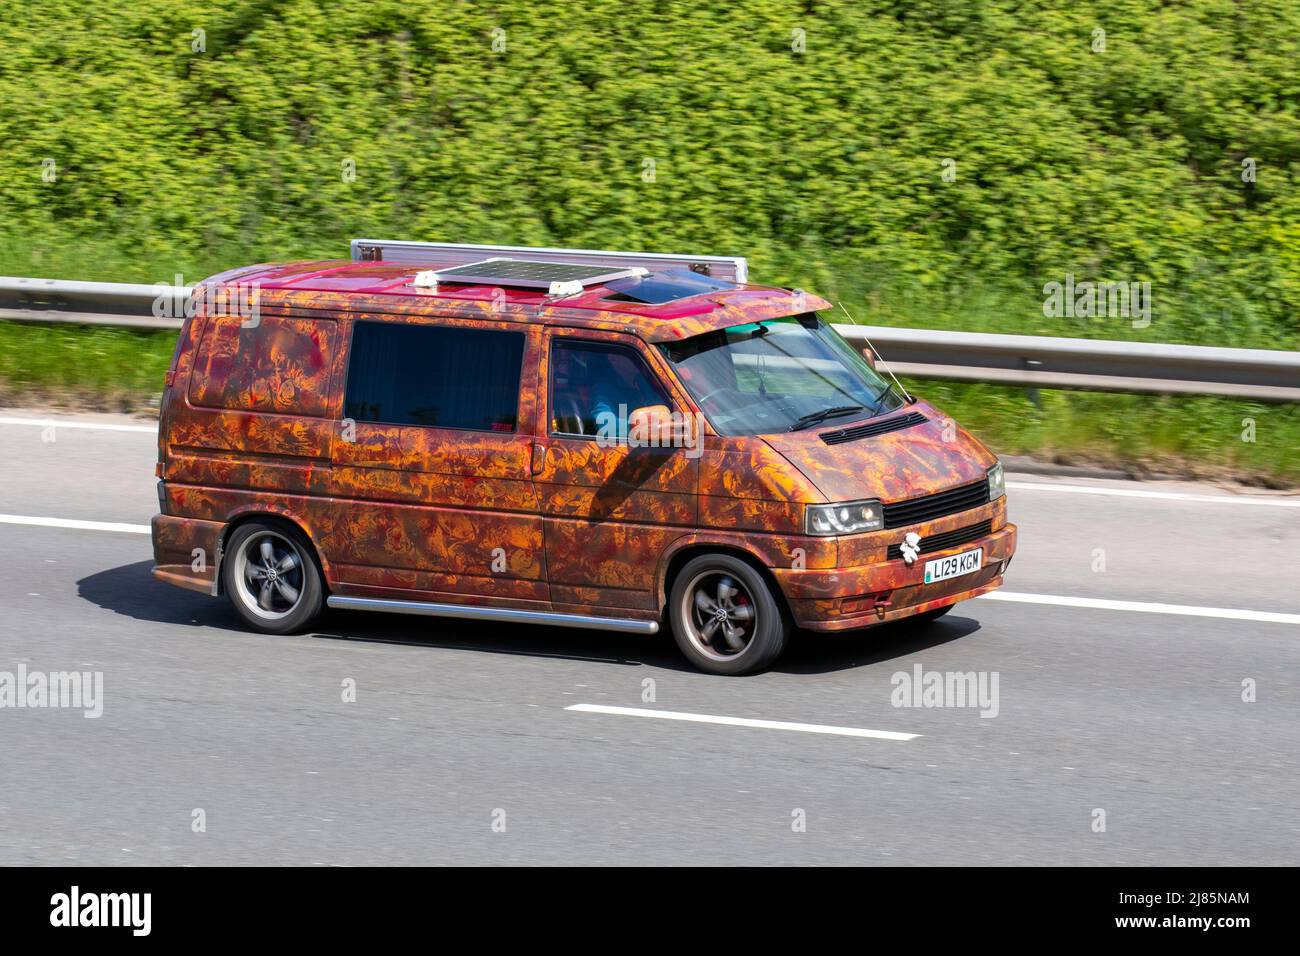 The VW T4 Eurovan and campervan: a buyers guide, picture gallery & info